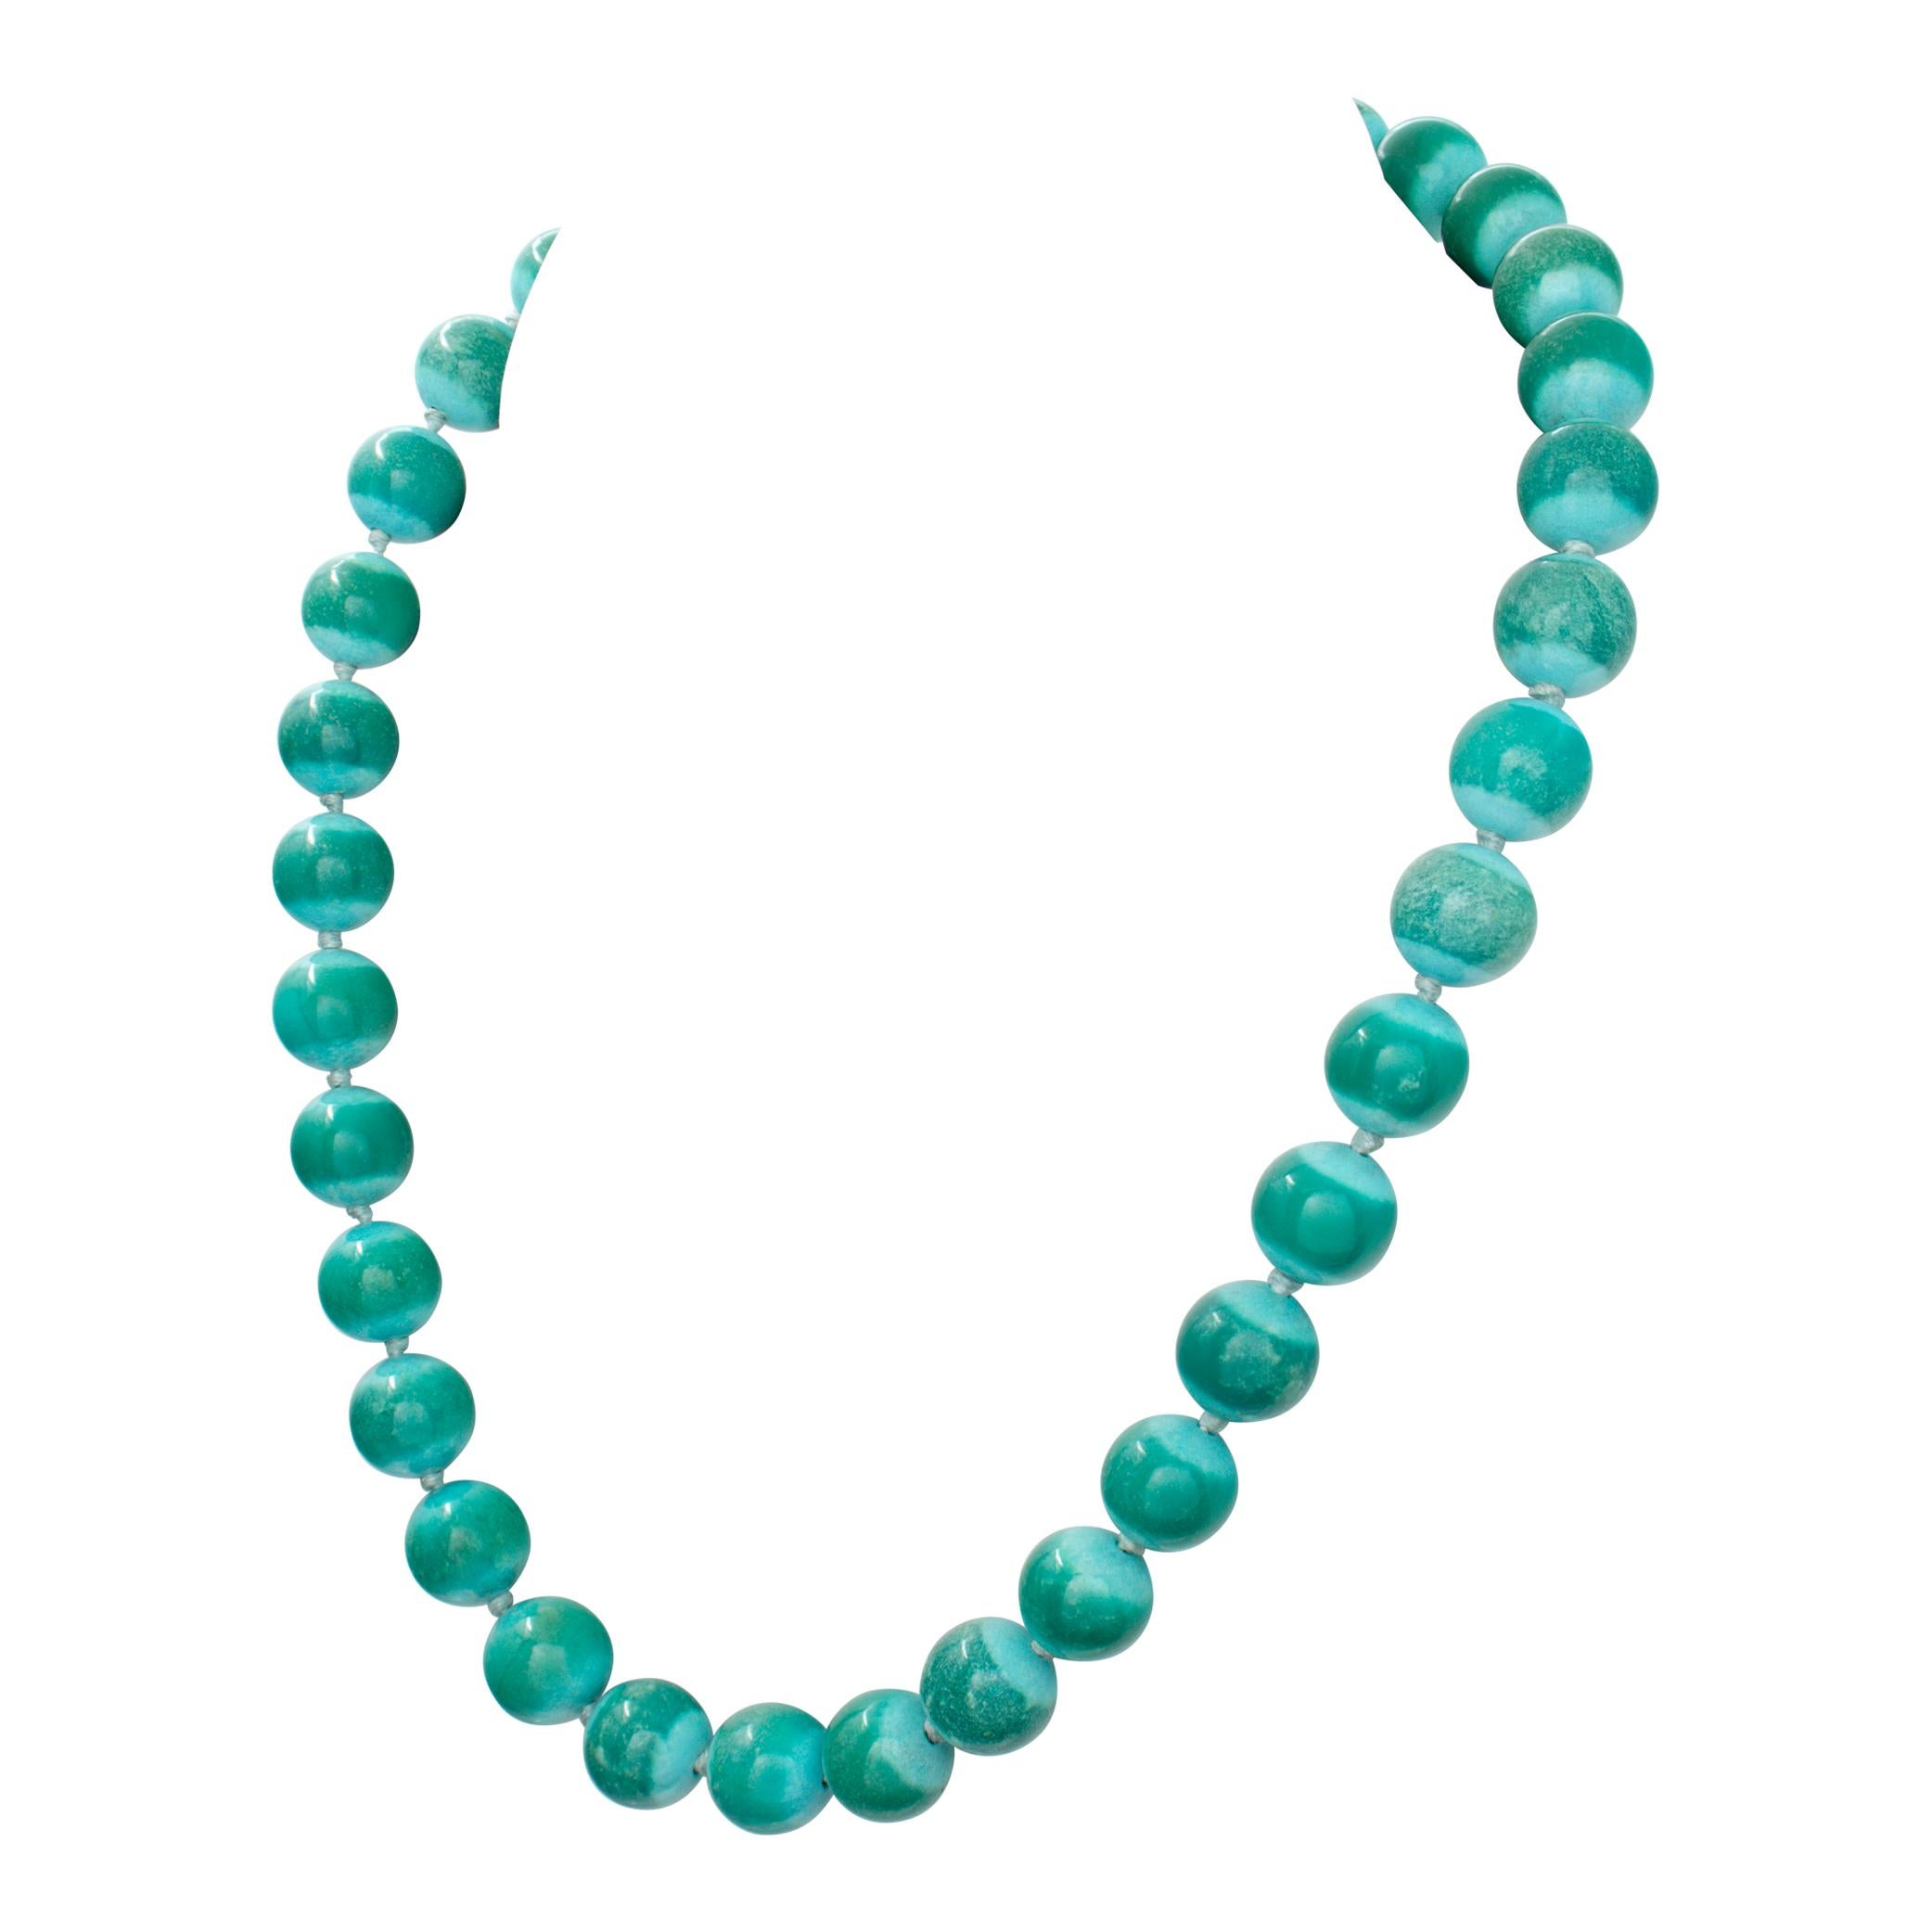 Angela Cummings Turquoise Bead Necklace with 18k clasp, 33 beads measure 11.7-12.1 mm, clasp signed CUMMINGS, 1993. Lengt 19 inches.
